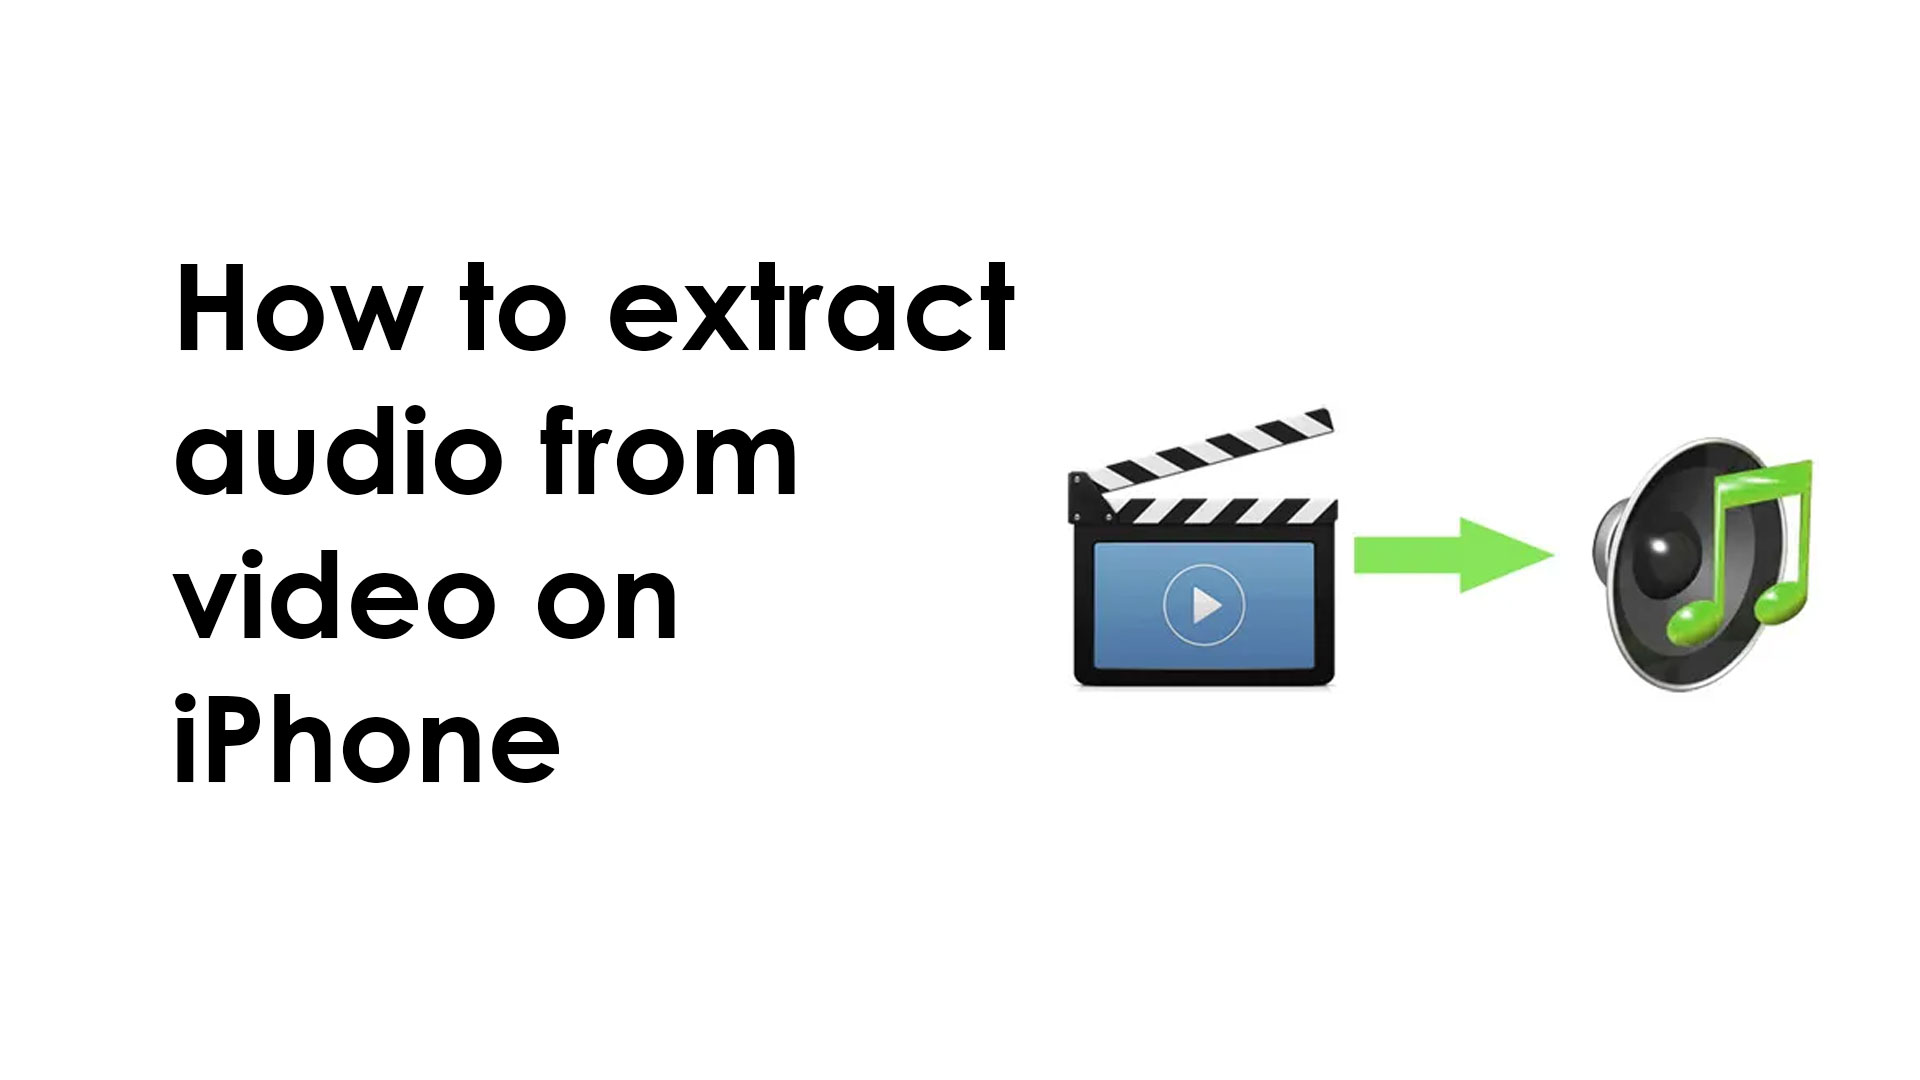 How to extract audio from video on iPhone